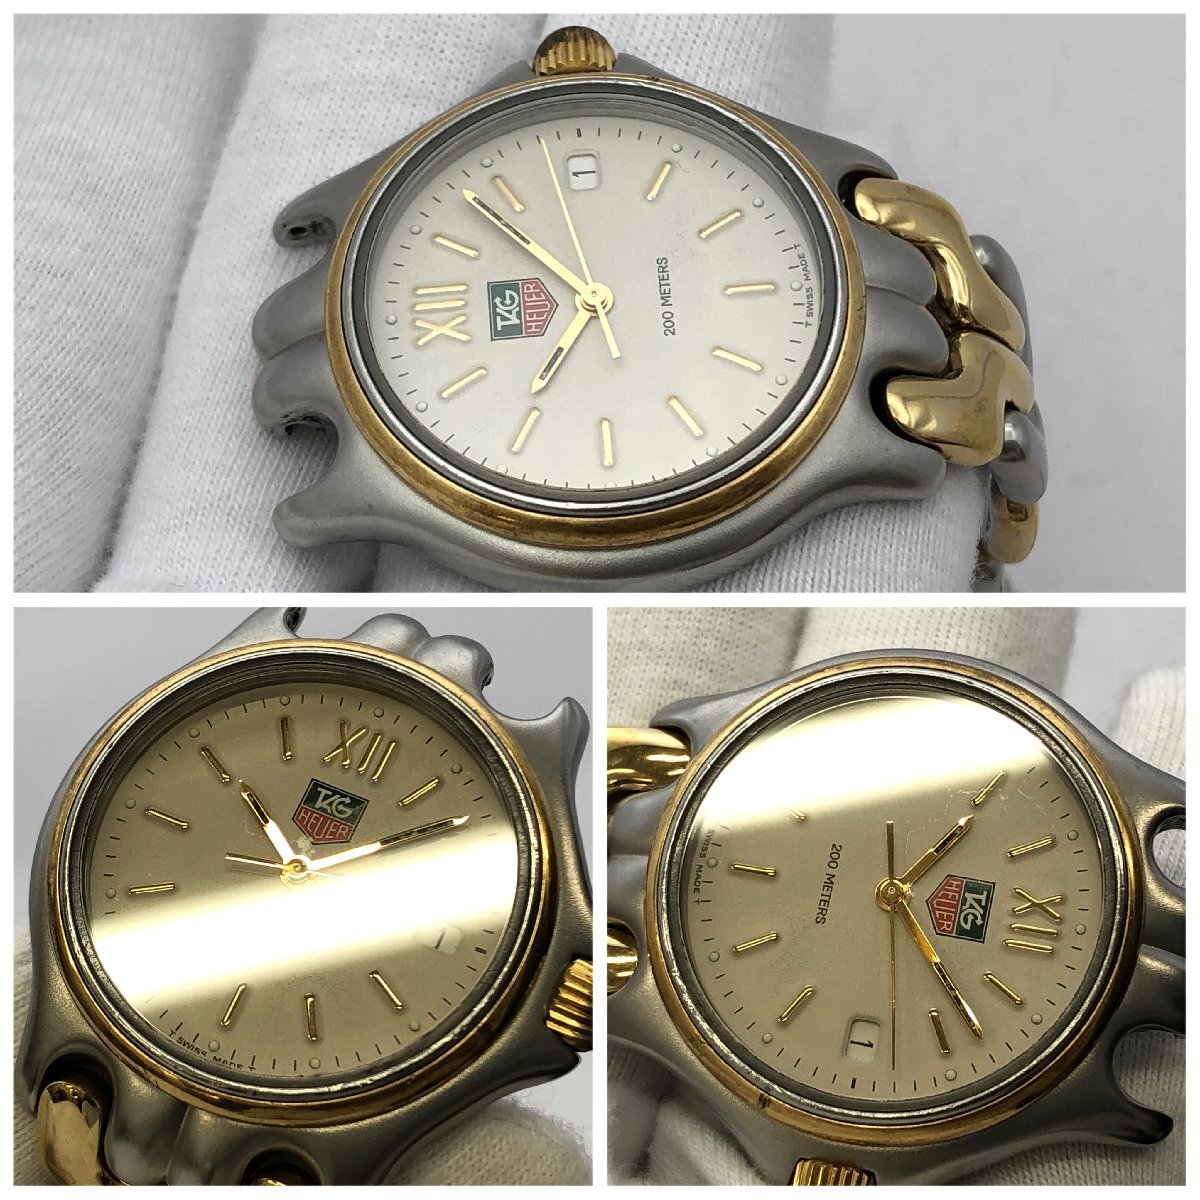 1 jpy ~/TAG HEUER/ TAG Heuer / cell / Professional /S05.013M/ 3 hands / Date / ivory series face /200M/ quartz / wristwatch / Junk /T090